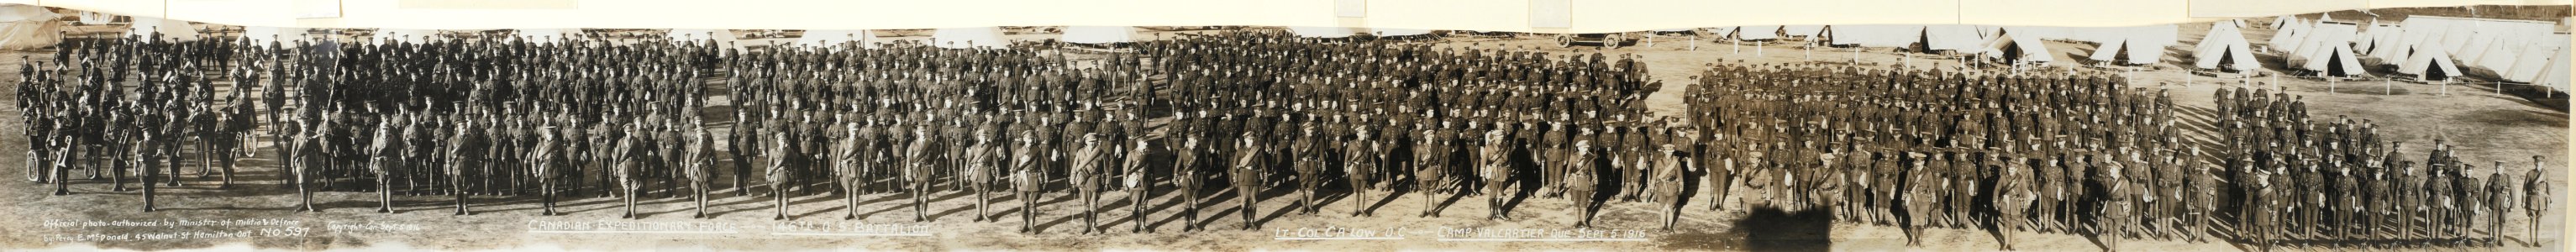 Canadian Expeditionary Force, 146th O.S. Battalion, Camp Valcartier, Sept. 5, 1917. Lt.-Col. C.A. Low, OC No. 597 (HS85-10-32562) photo